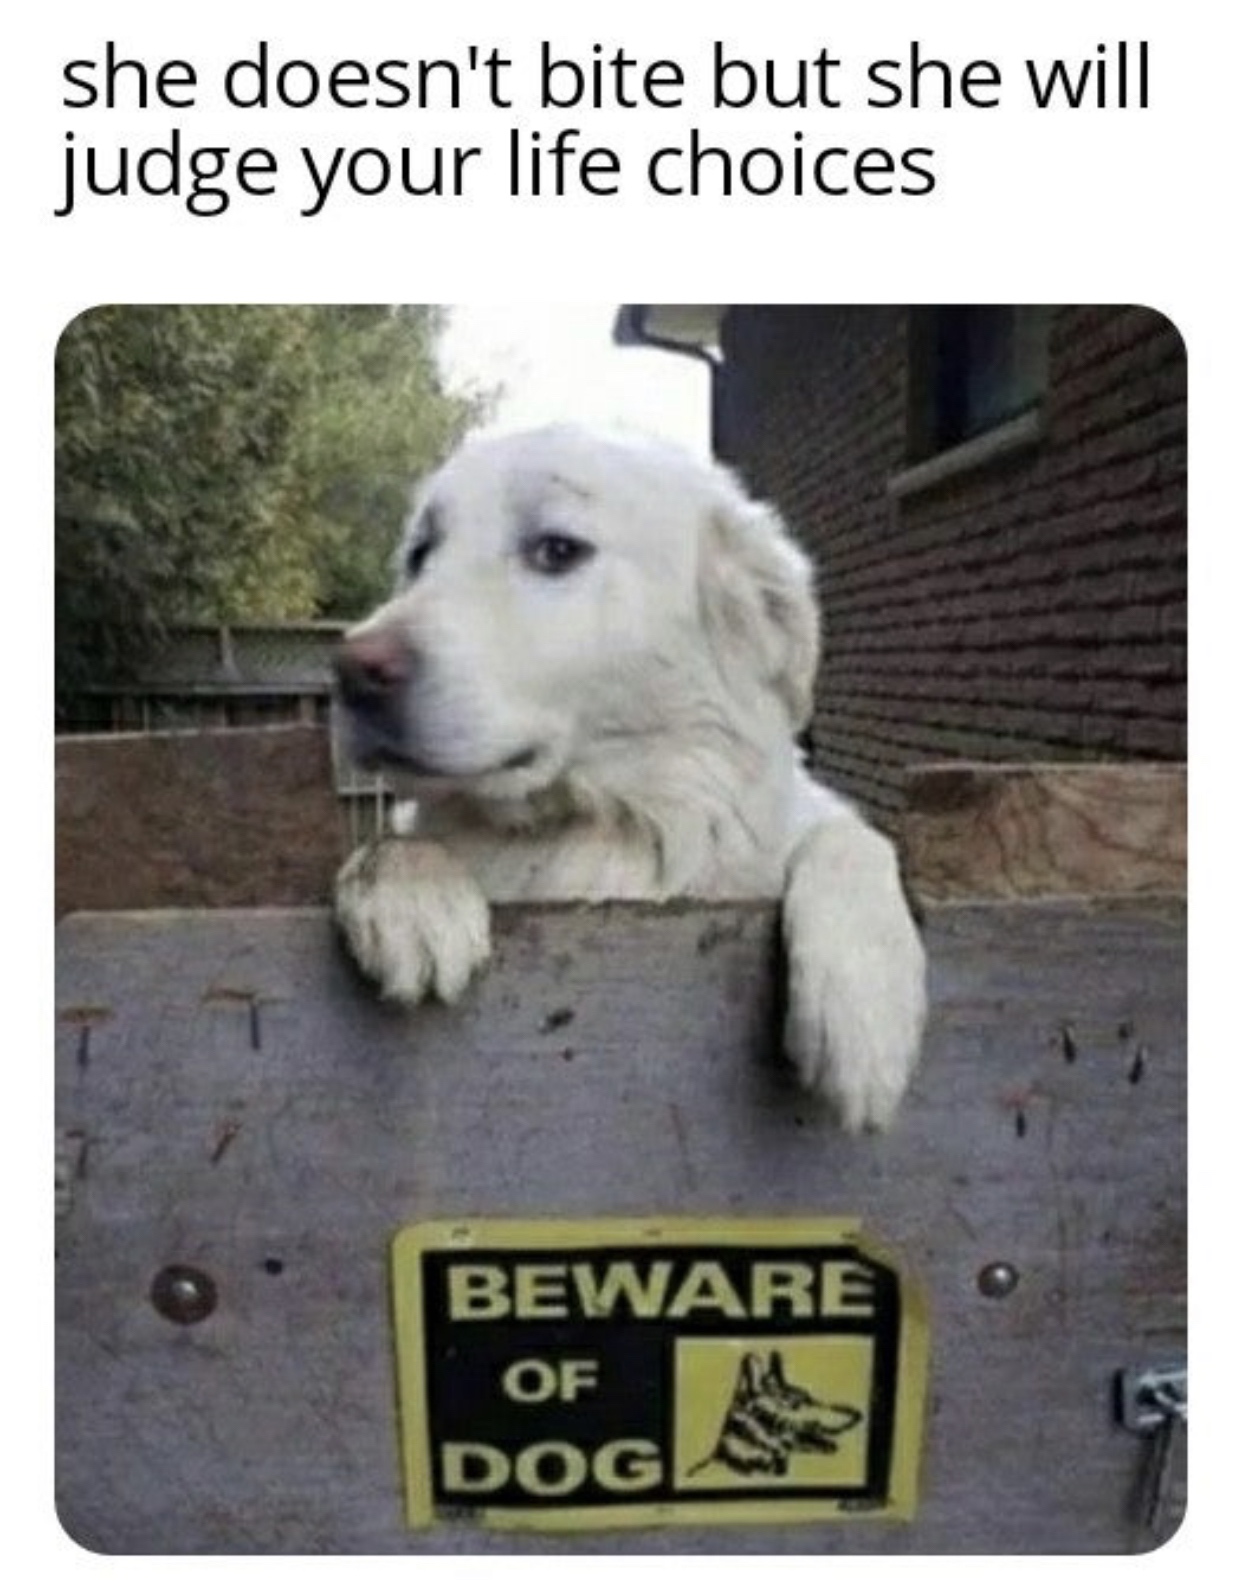 funny memes and tweets - maybe i will bite maybe i wont dog meme - she doesn't bite but she will judge your life choices Beware Of Doga